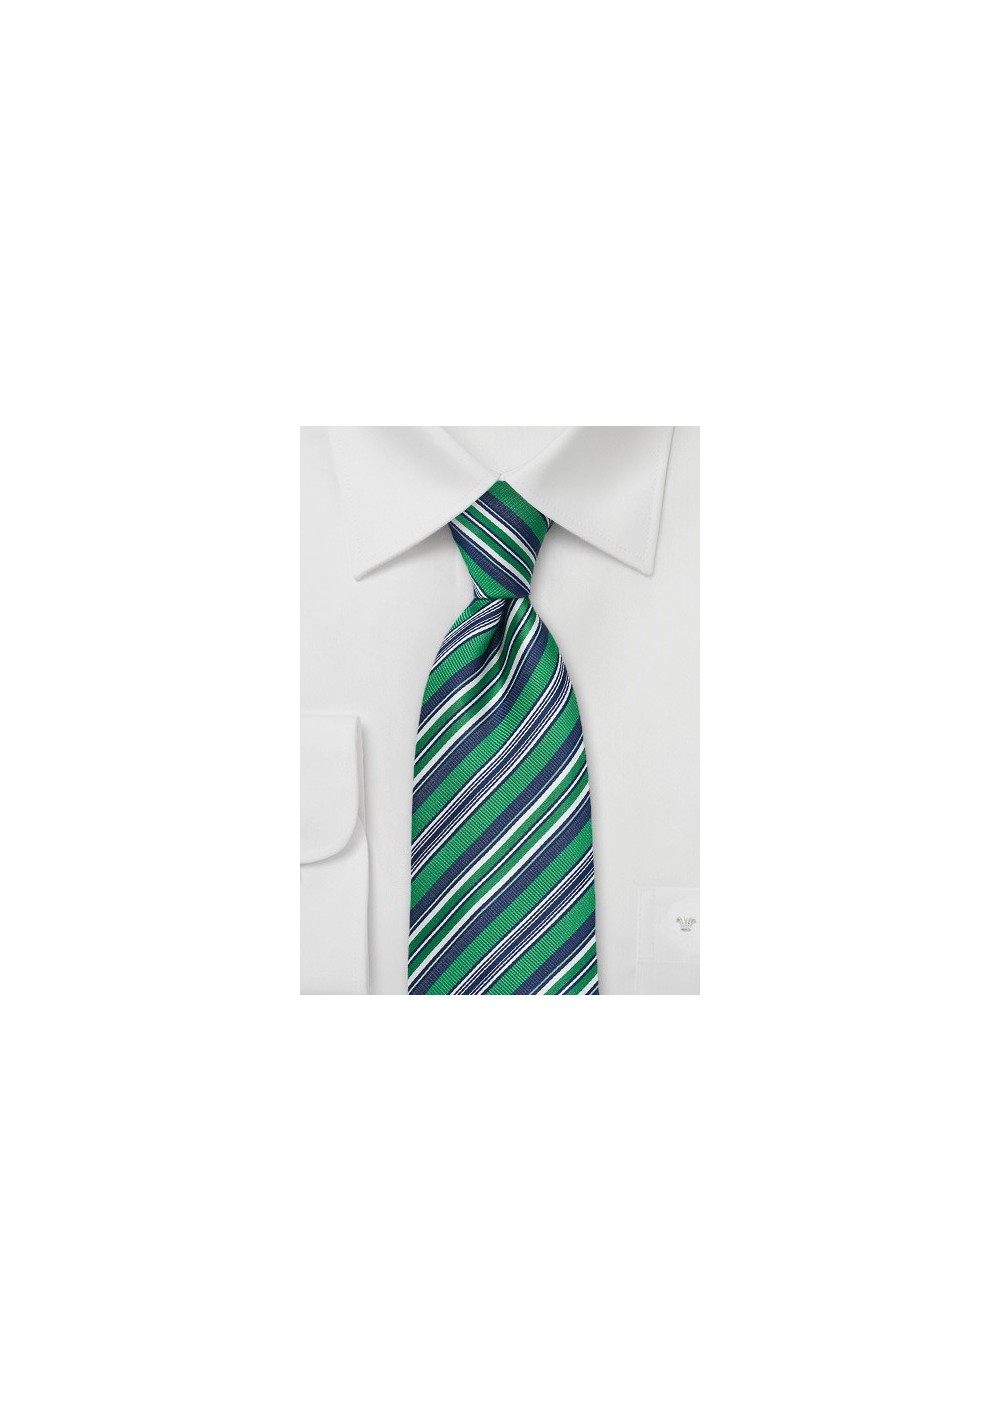 Bright Green and Blue Striped Tie